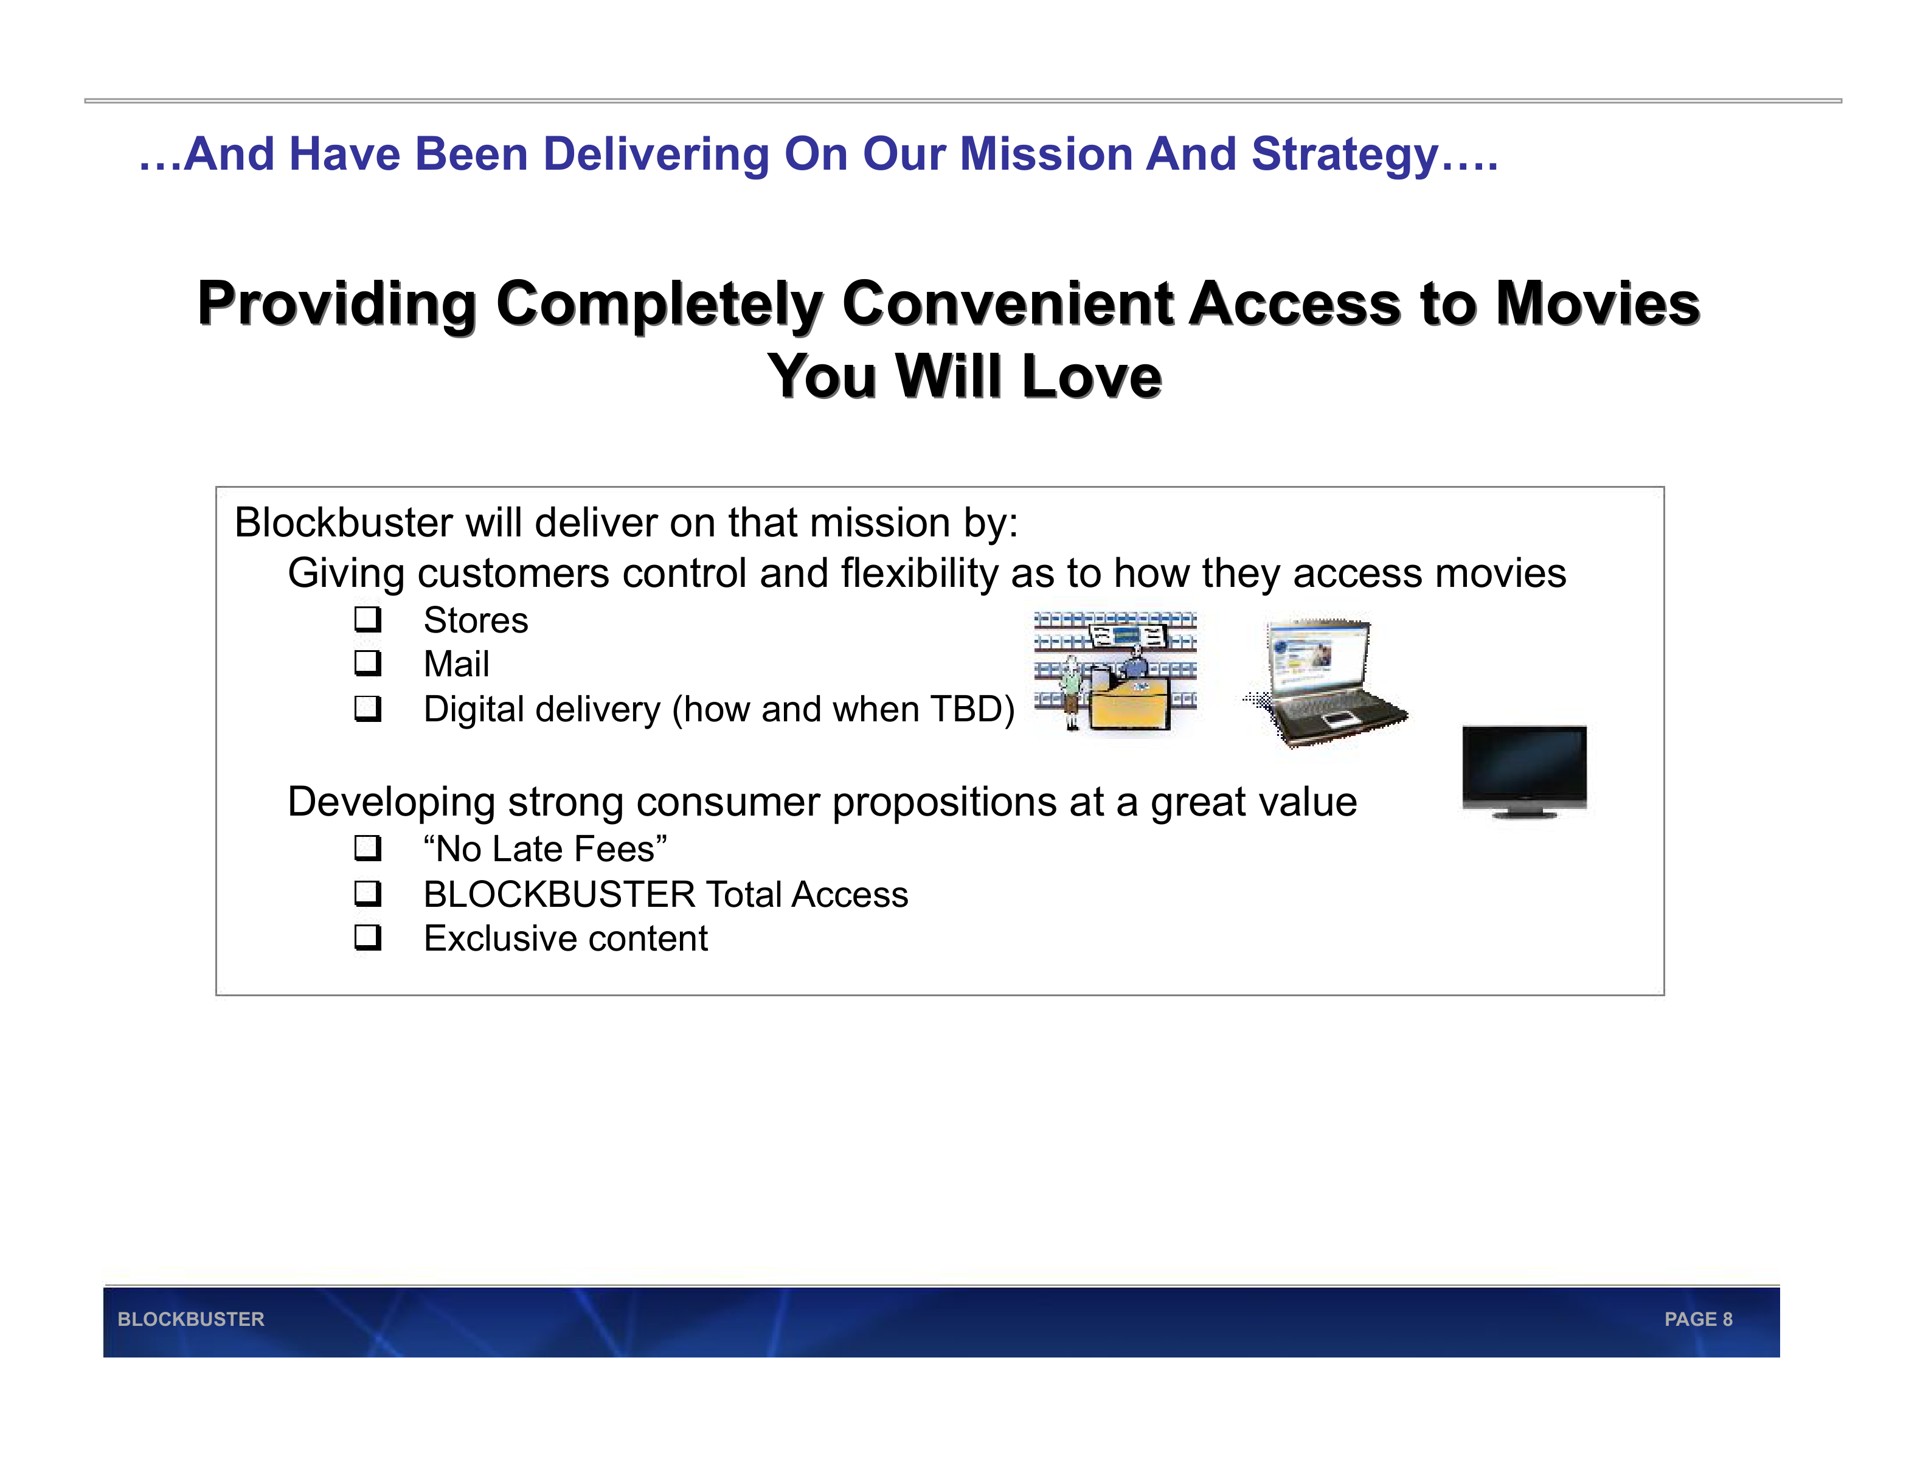 and have been delivering on our mission and strategy providing completely convenient access to movies providing completely convenient access to movies you will love you will love blockbuster will deliver on that mission by giving customers control and flexibility as to how they access movies developing strong consumer propositions at a great value now mail no late fees total | Blockbuster Video